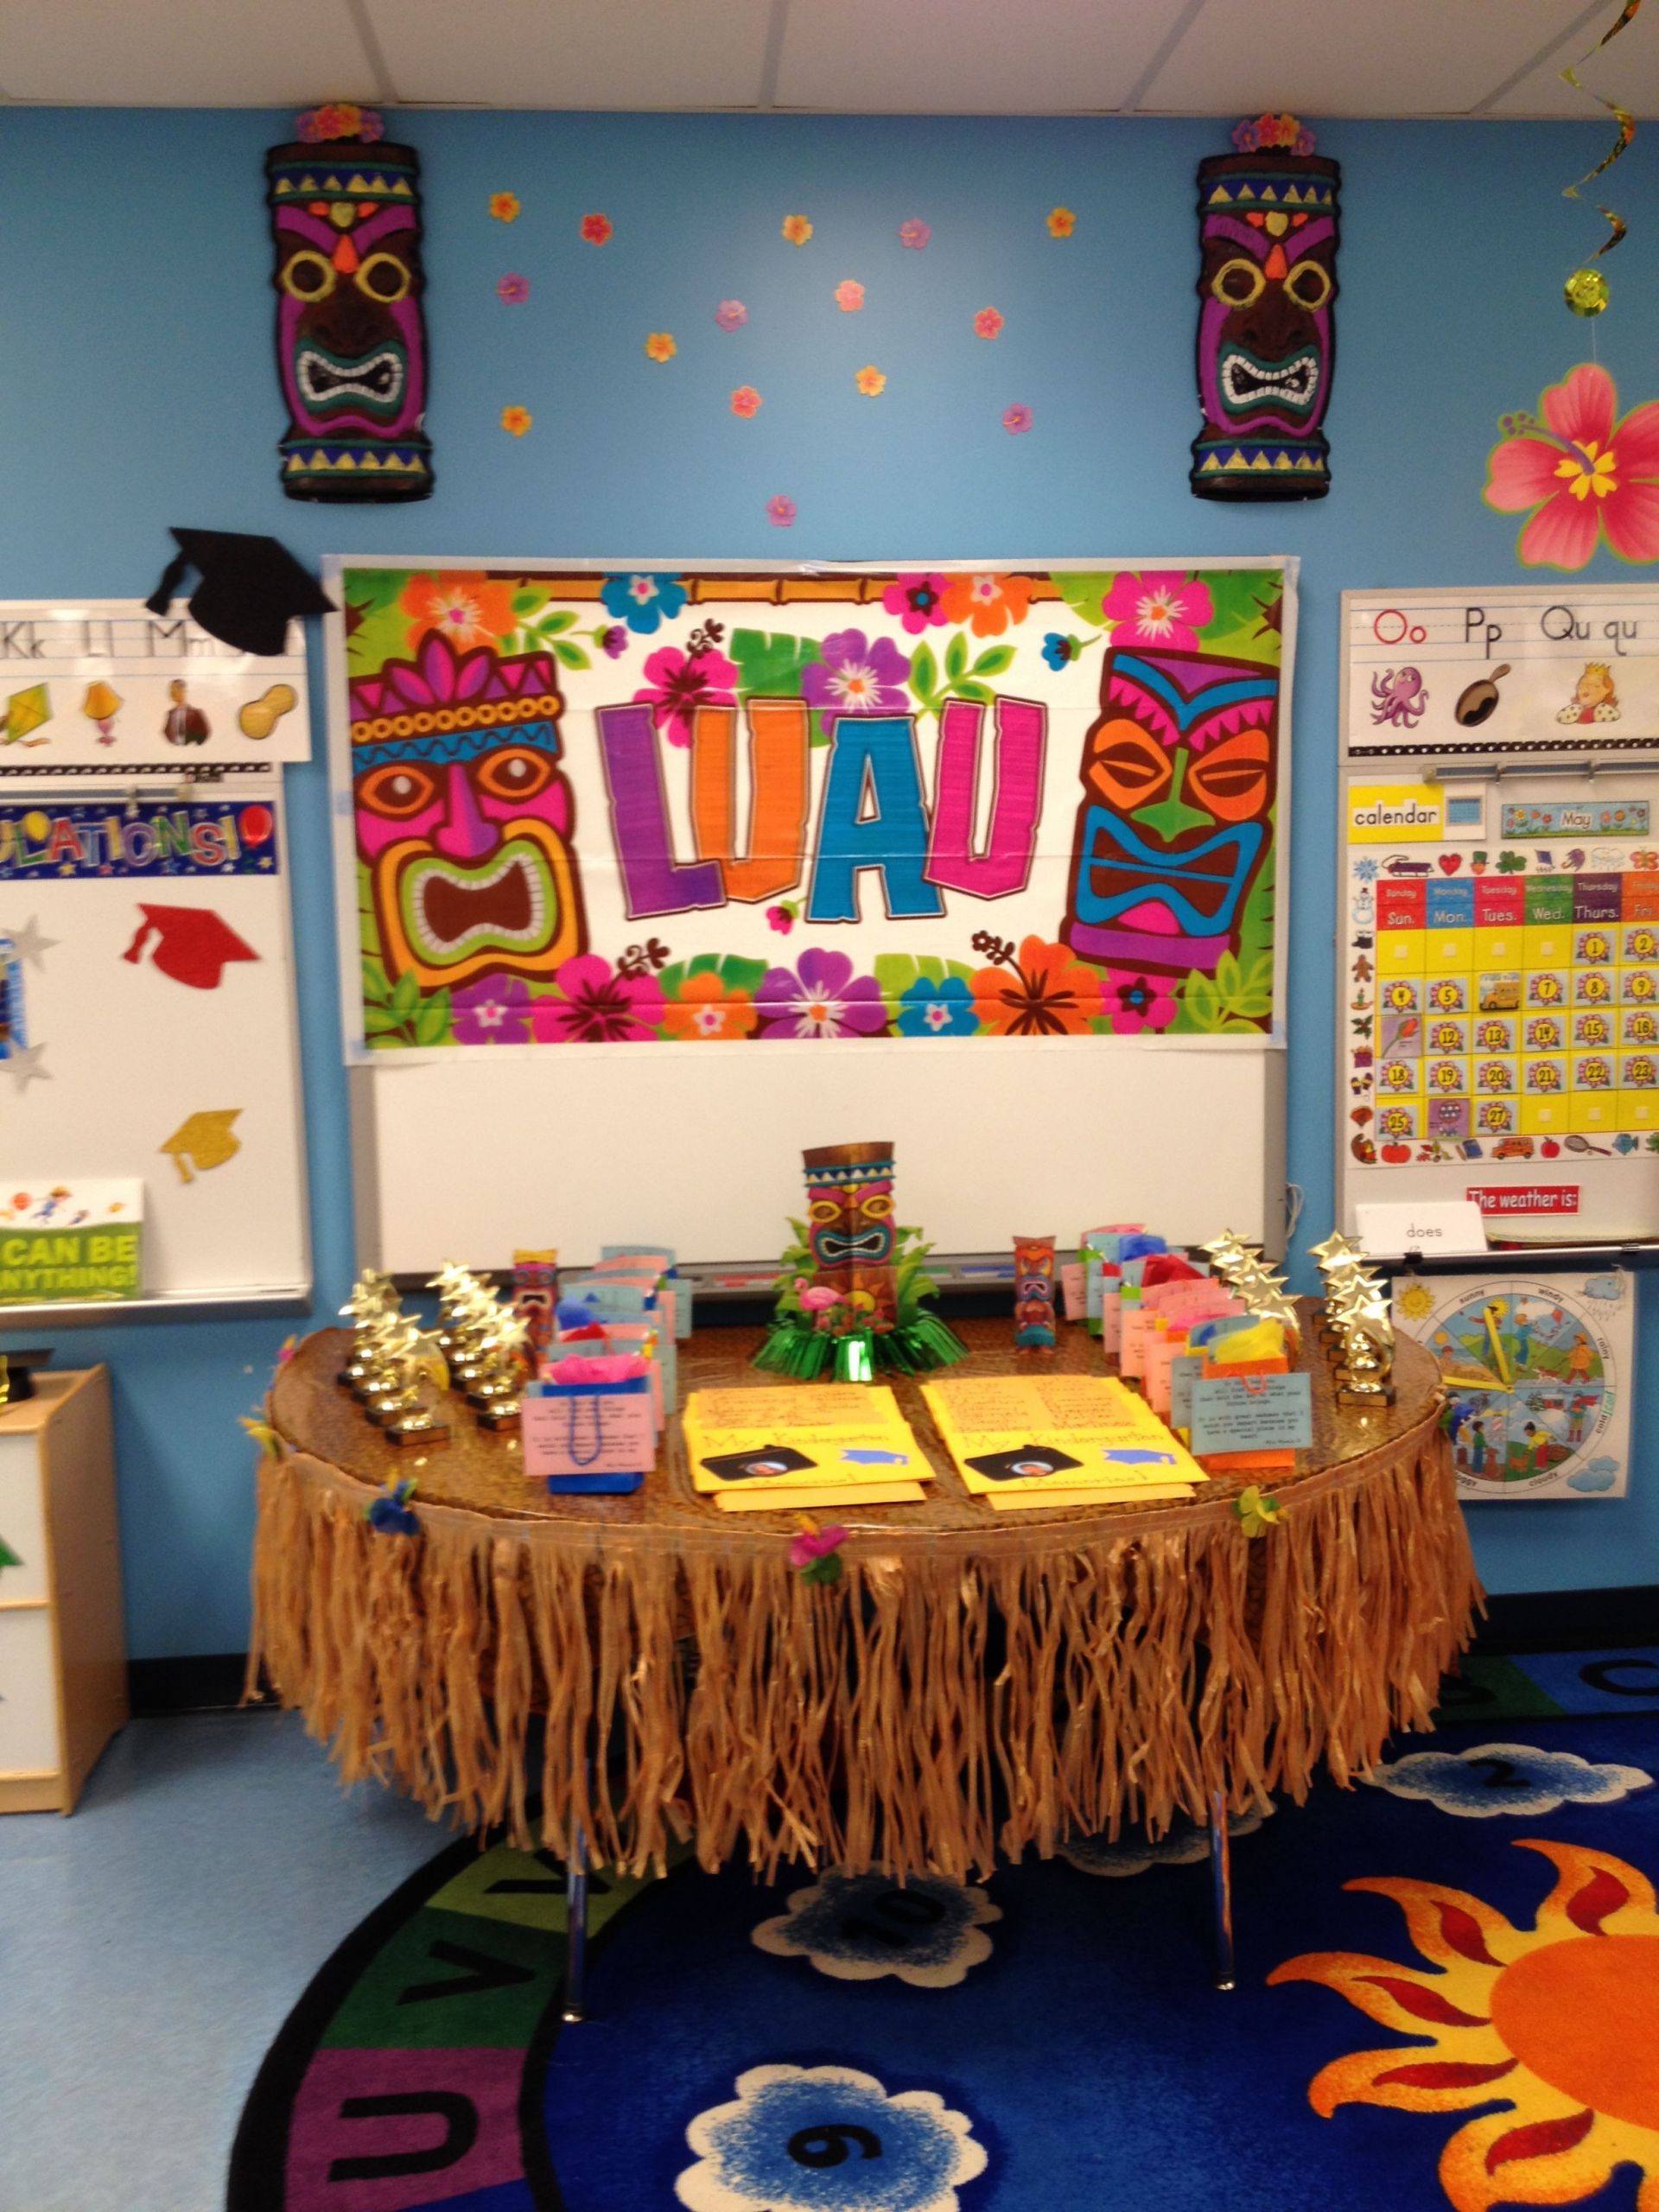 Beach Party Ideas For Preschoolers
 "Luau" end of the year celebration